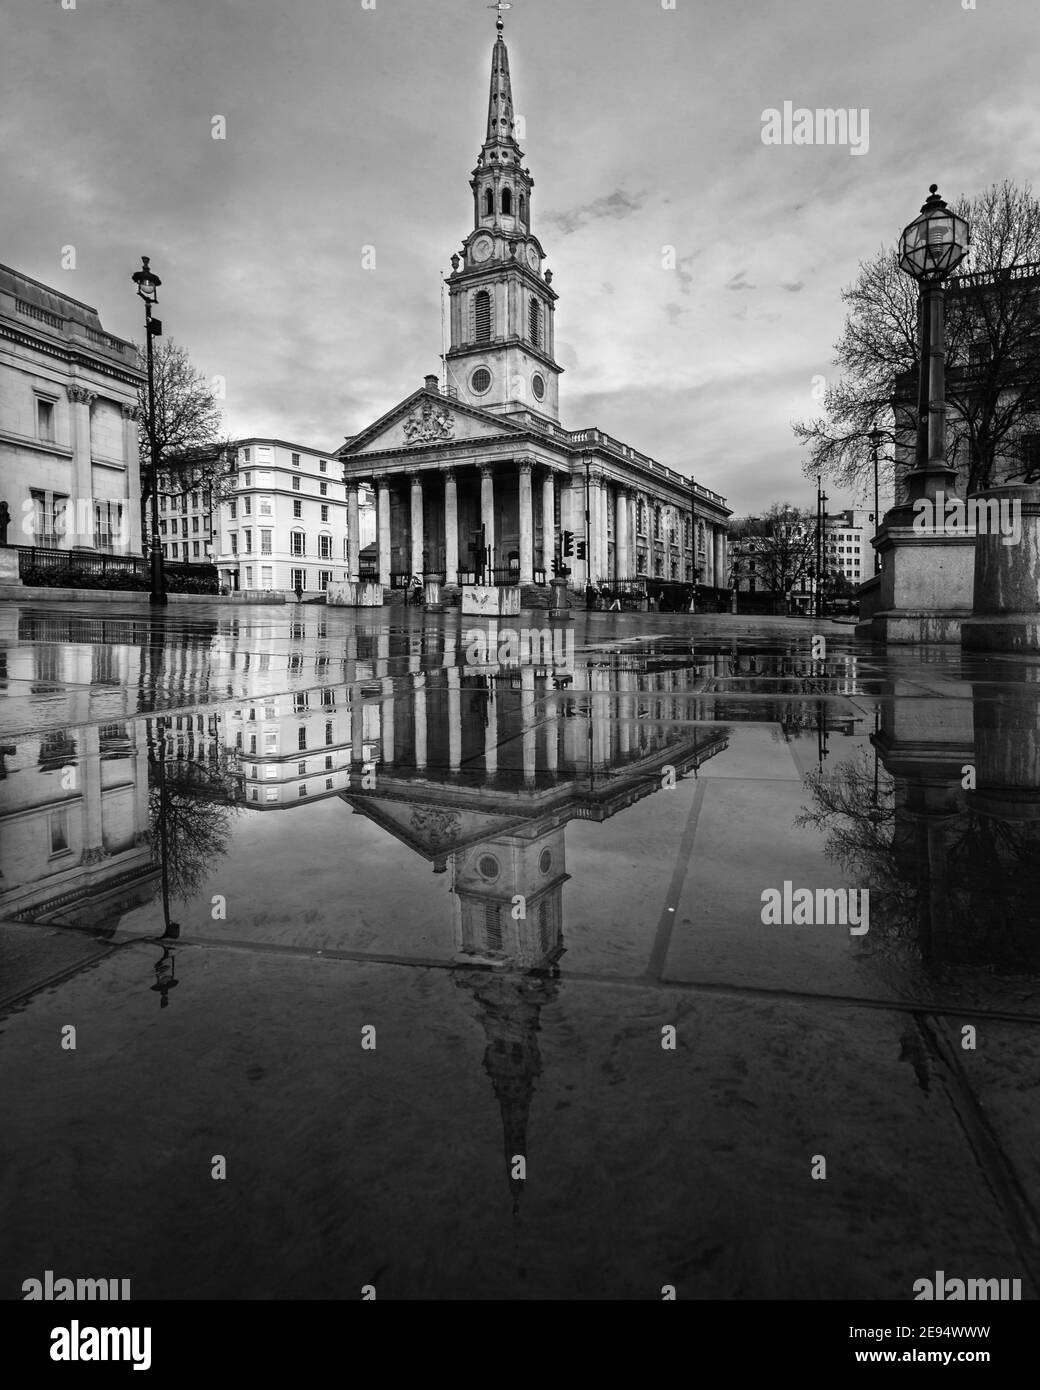 St. Martin-in-the-Fields in London reflecting after the rain. Stock Photo